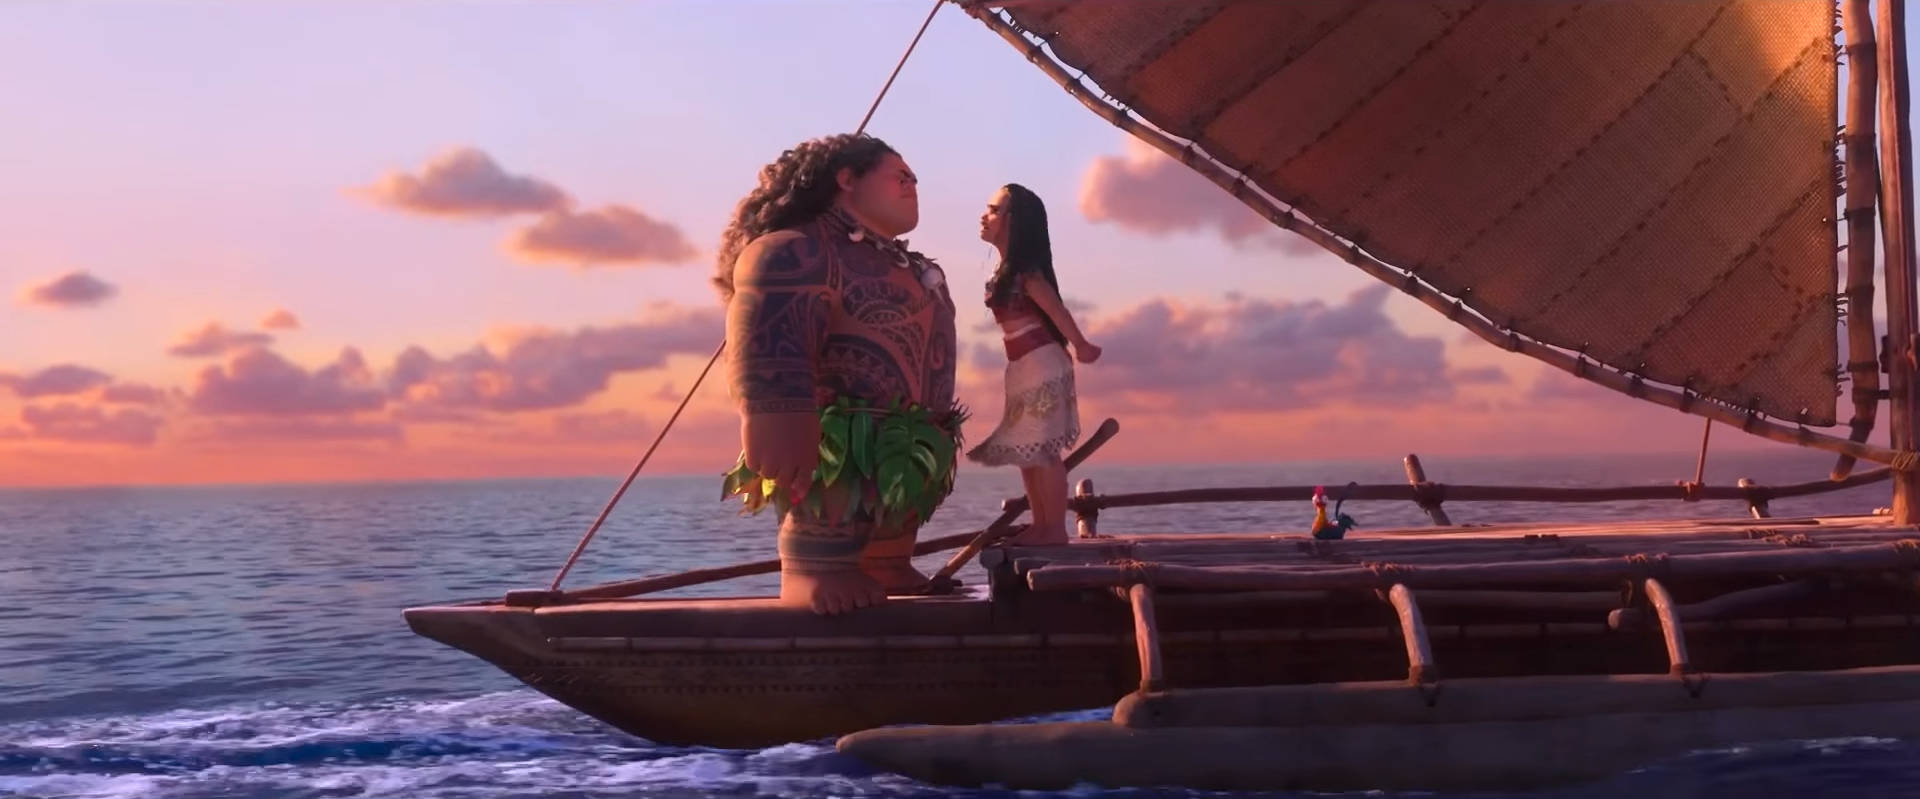 Moana In Front Of Maui Background